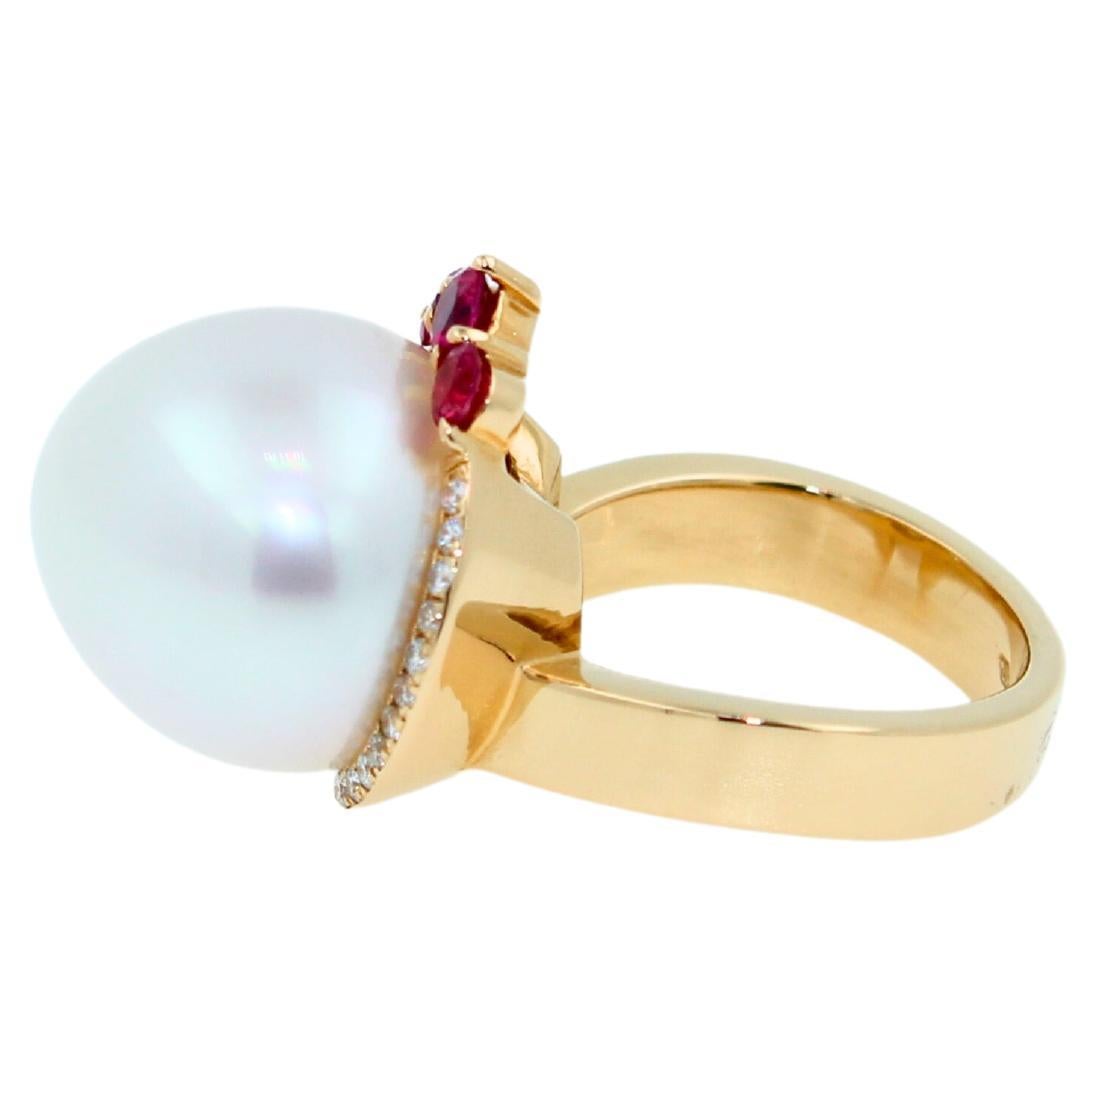 White South Sea Pearl Diamond Halo Comet Form Pink Red Spinel 18 Karat Gold Ring In New Condition For Sale In Oakton, VA